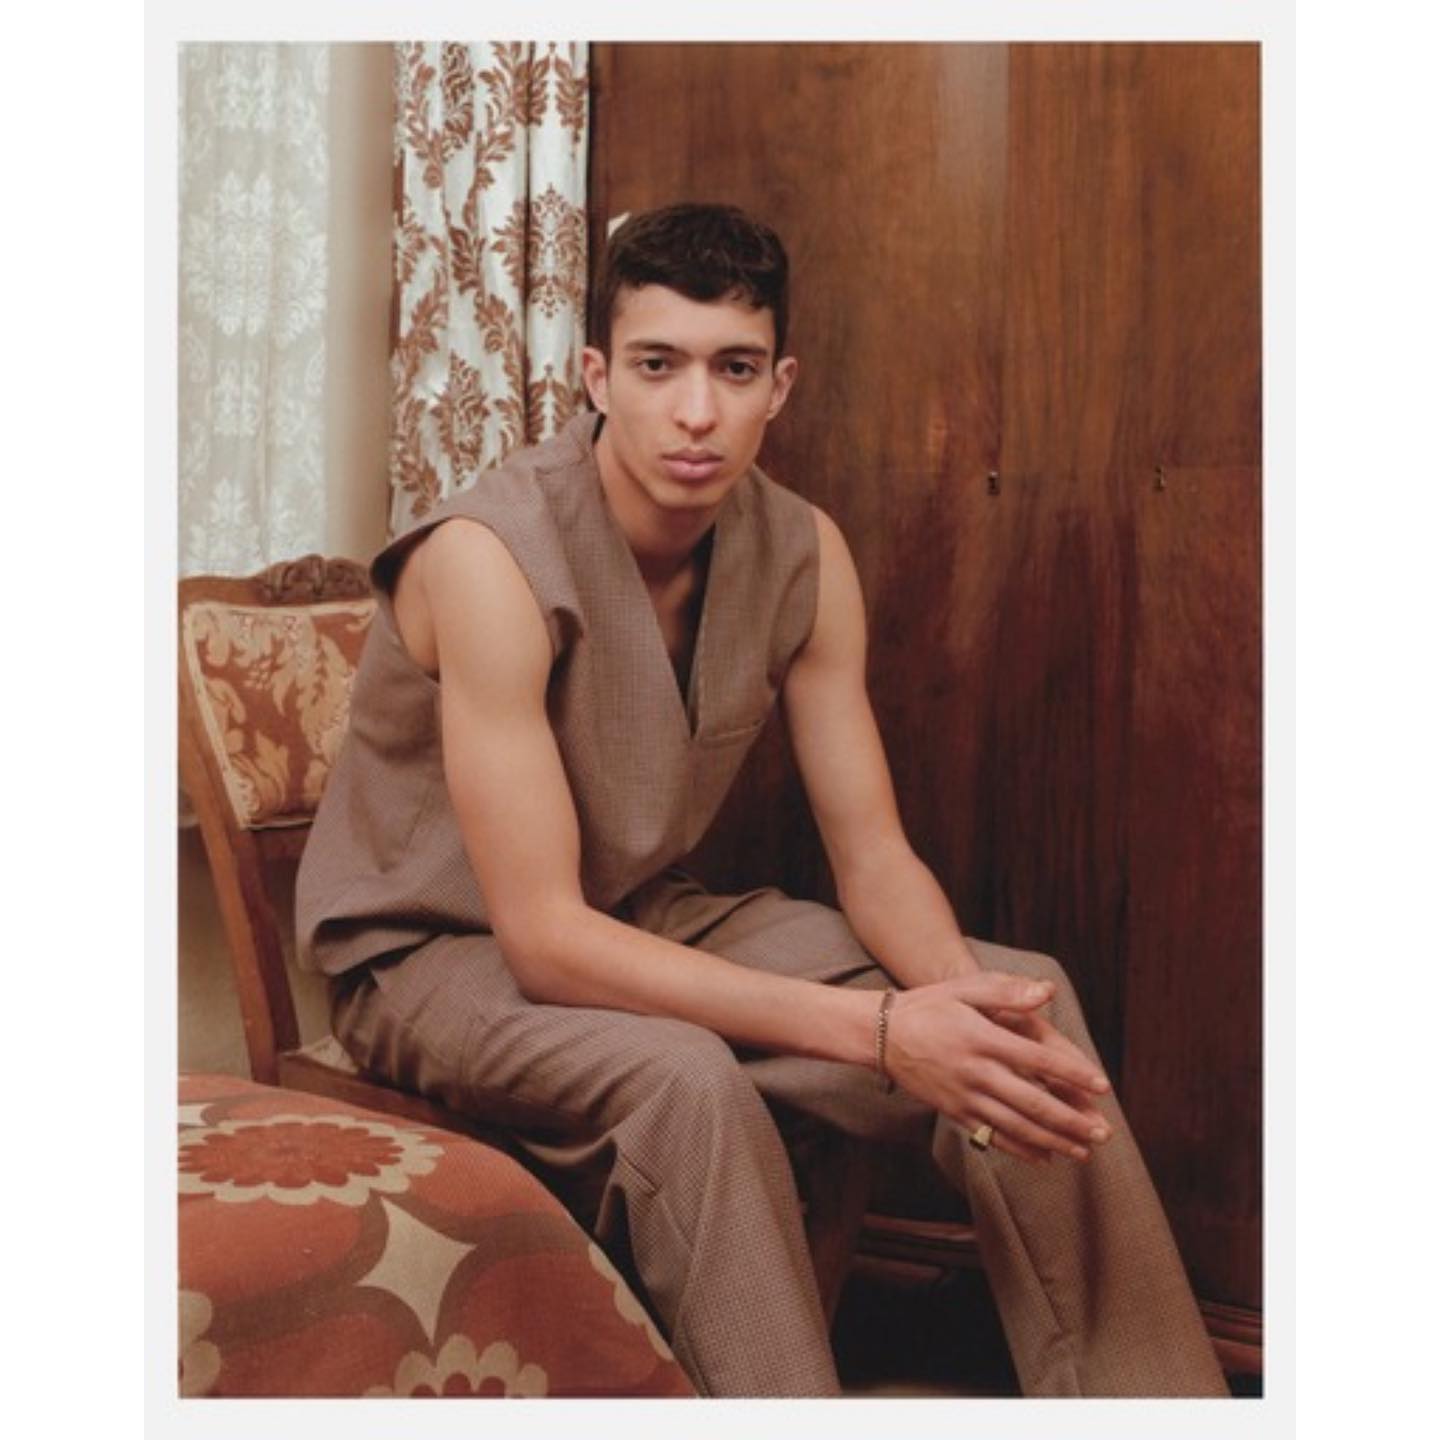 Noureddine (@nour.bdk ) and Mehdi (@mehdi.bzm ) for Holiday Magazine The Istanbul Issue. Photography by Felipe Romero Beltrán, styling by Tony Irvine, grooming by Hüseyin Altun, casting by Barbara Nicoli and Leila Ananna.